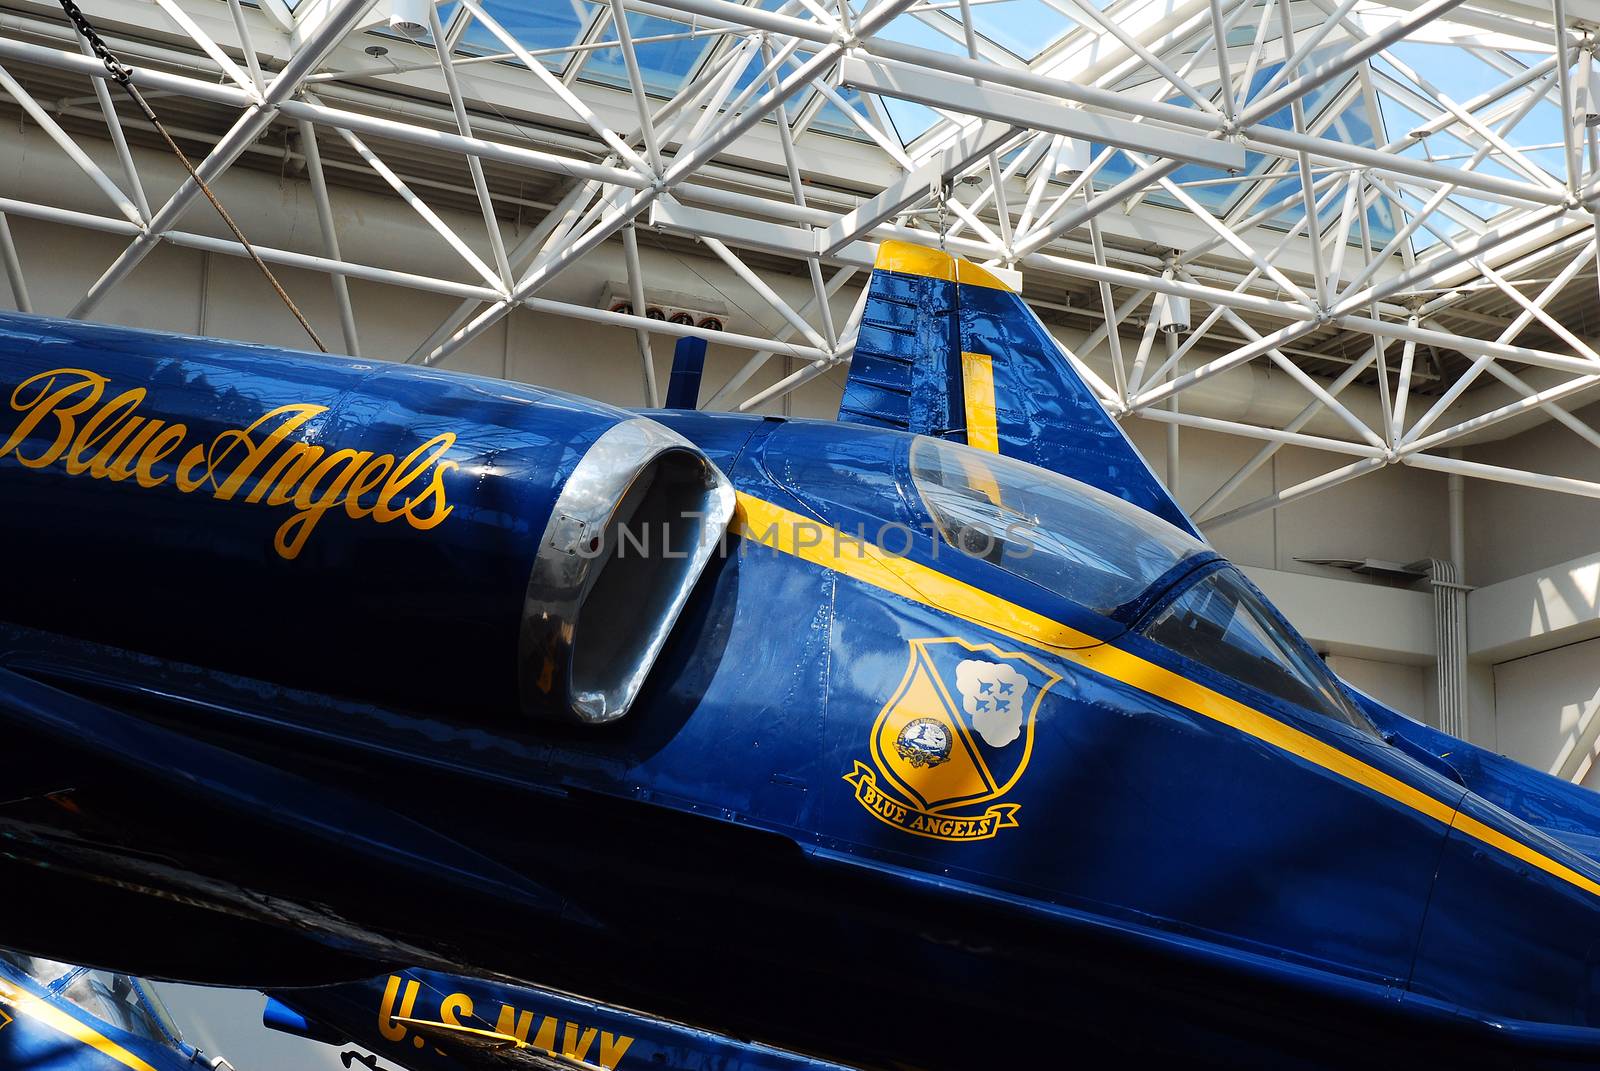 Blue Angel jets are on display at the Naval Aviation Museum in Pensacola, Florida